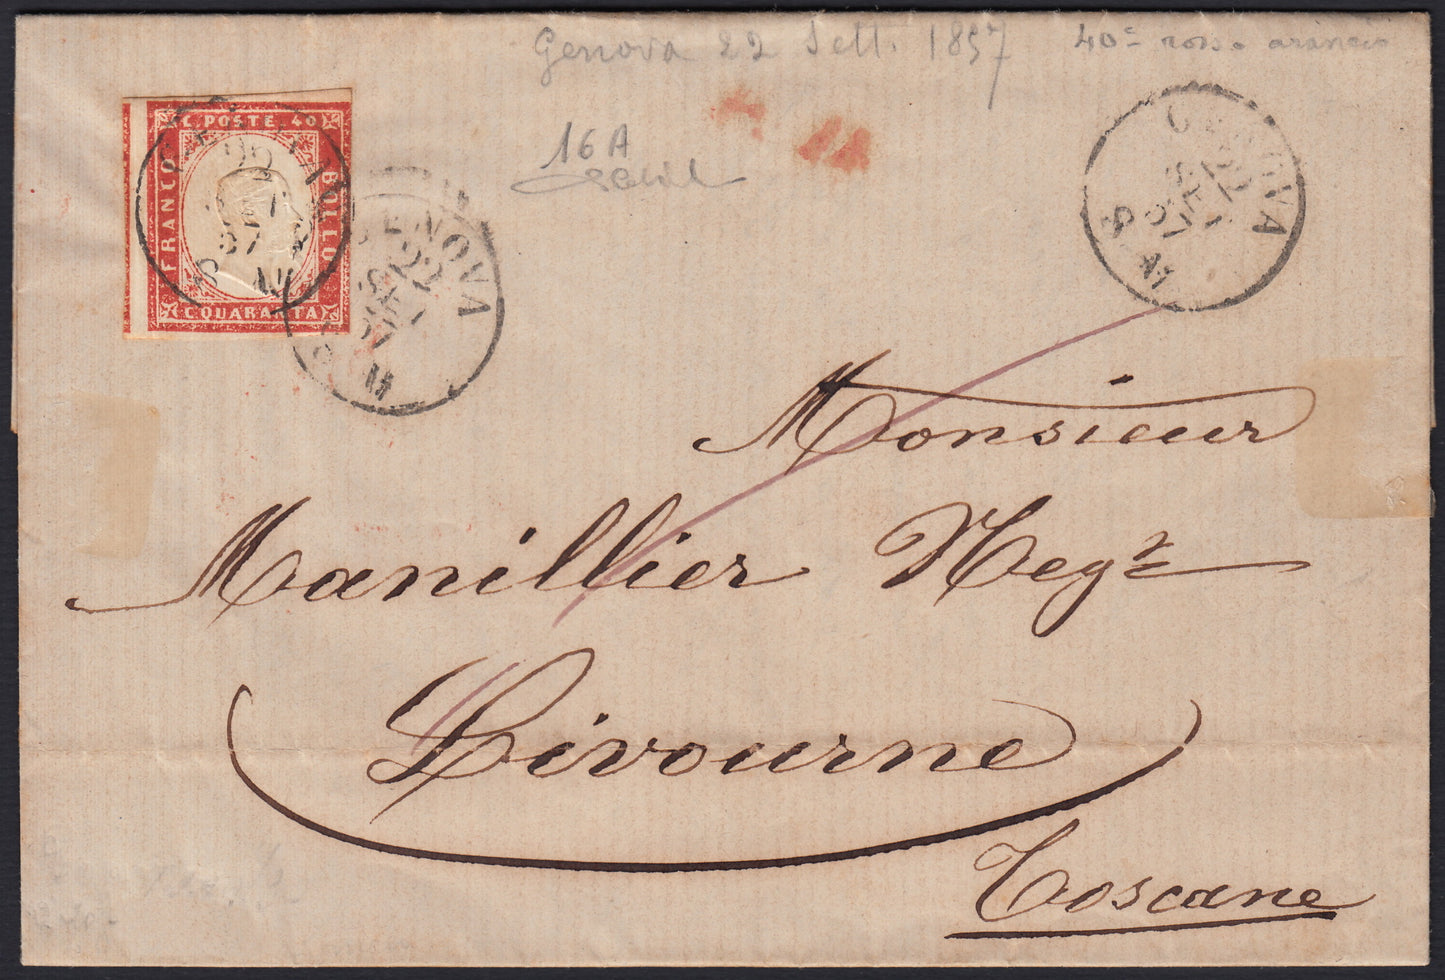 259 - 1857 - IV issue, Letter sent from Genoa to Livorno 22/9/57 franked with c. 40 scarlet red edition 1857 (16A, Rattone n. 33a)